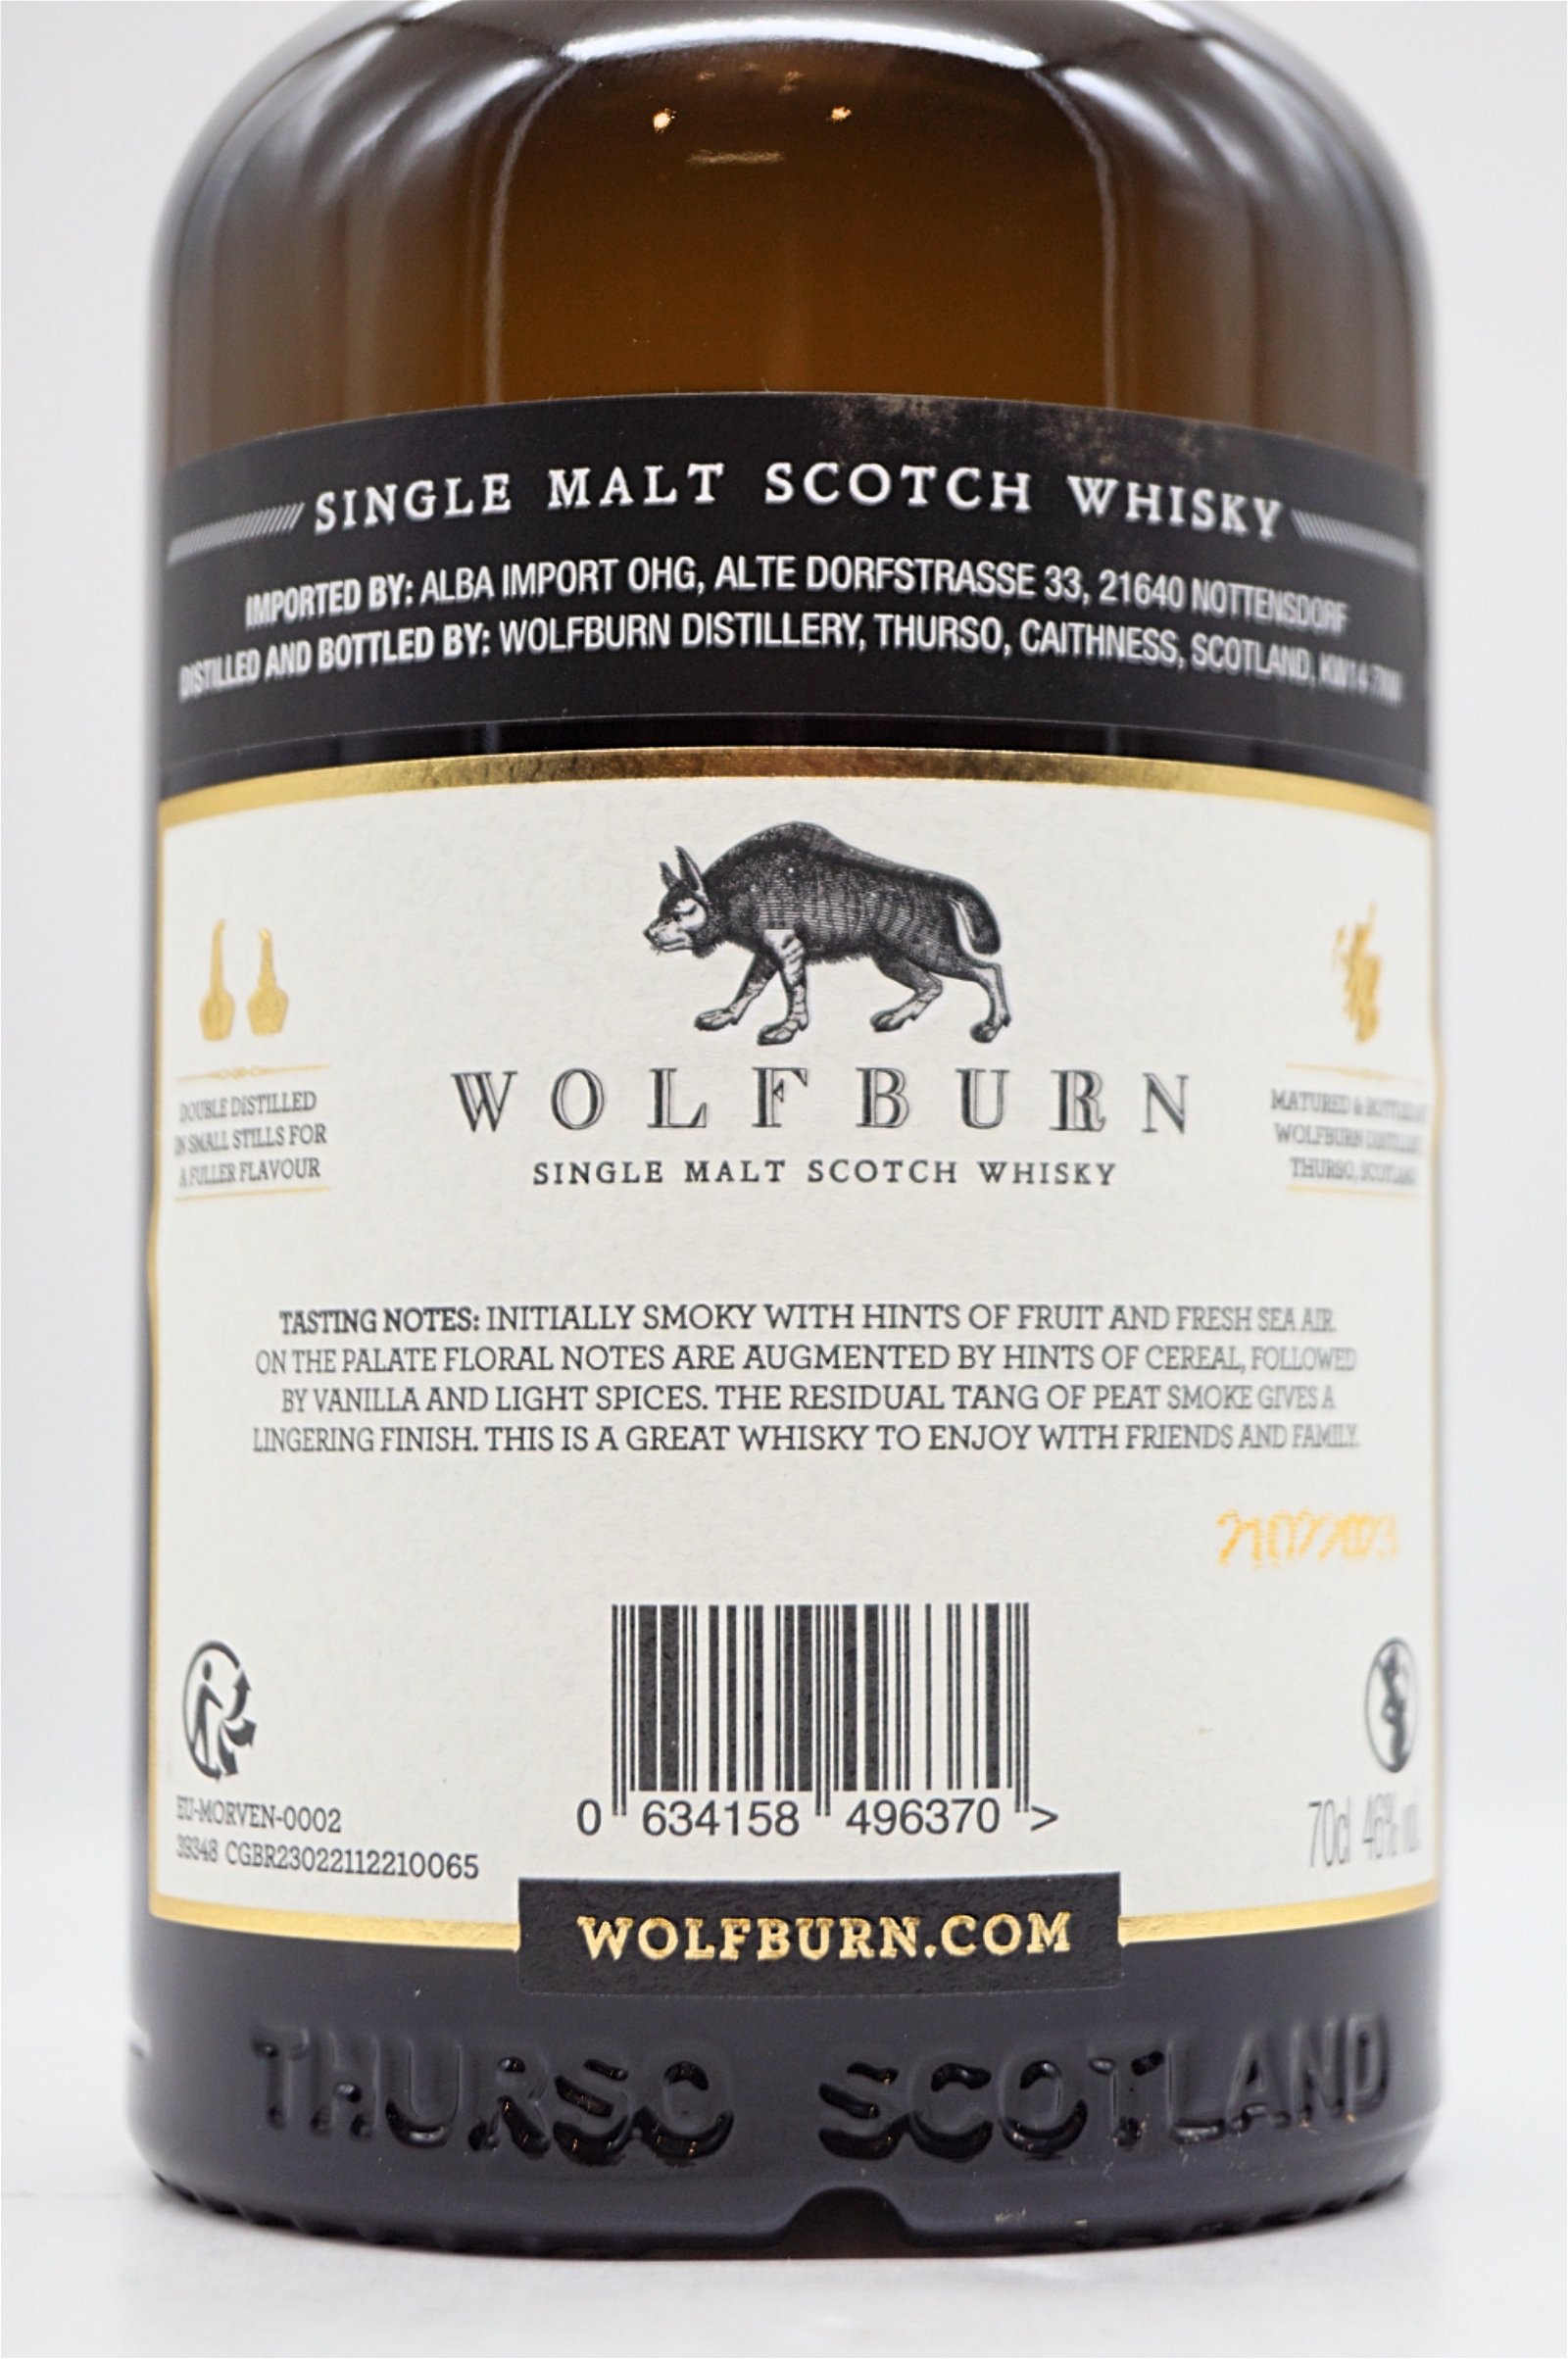 Wolfburn Morven lightly peated non Chill Filtered Single Malt Scotch Whisky